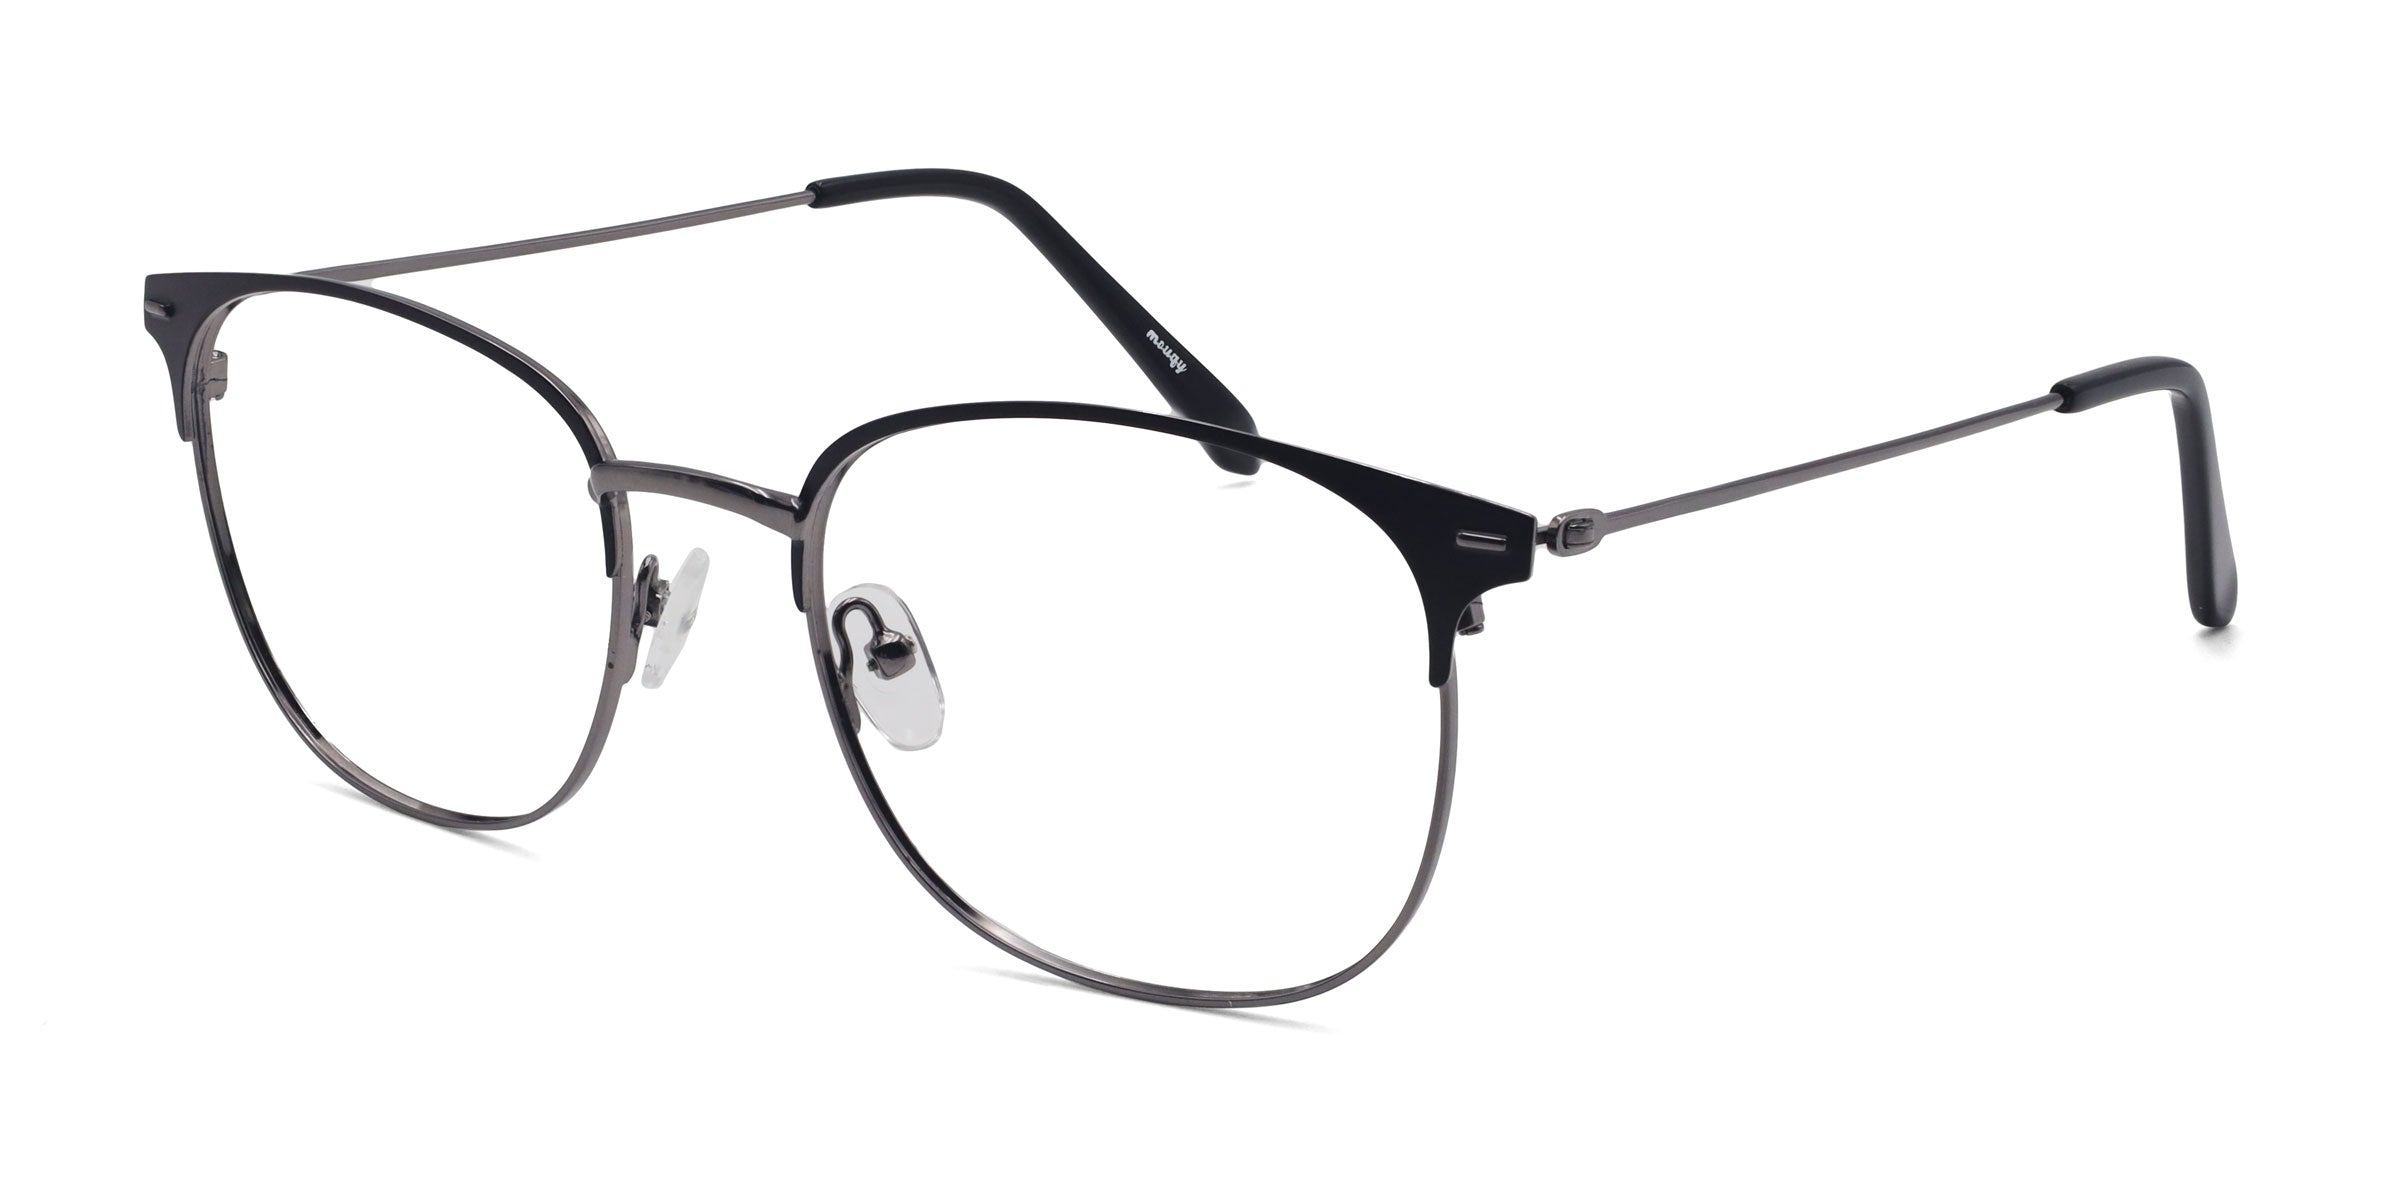 Isotonic Browline Silver eyeglasses frames angled view